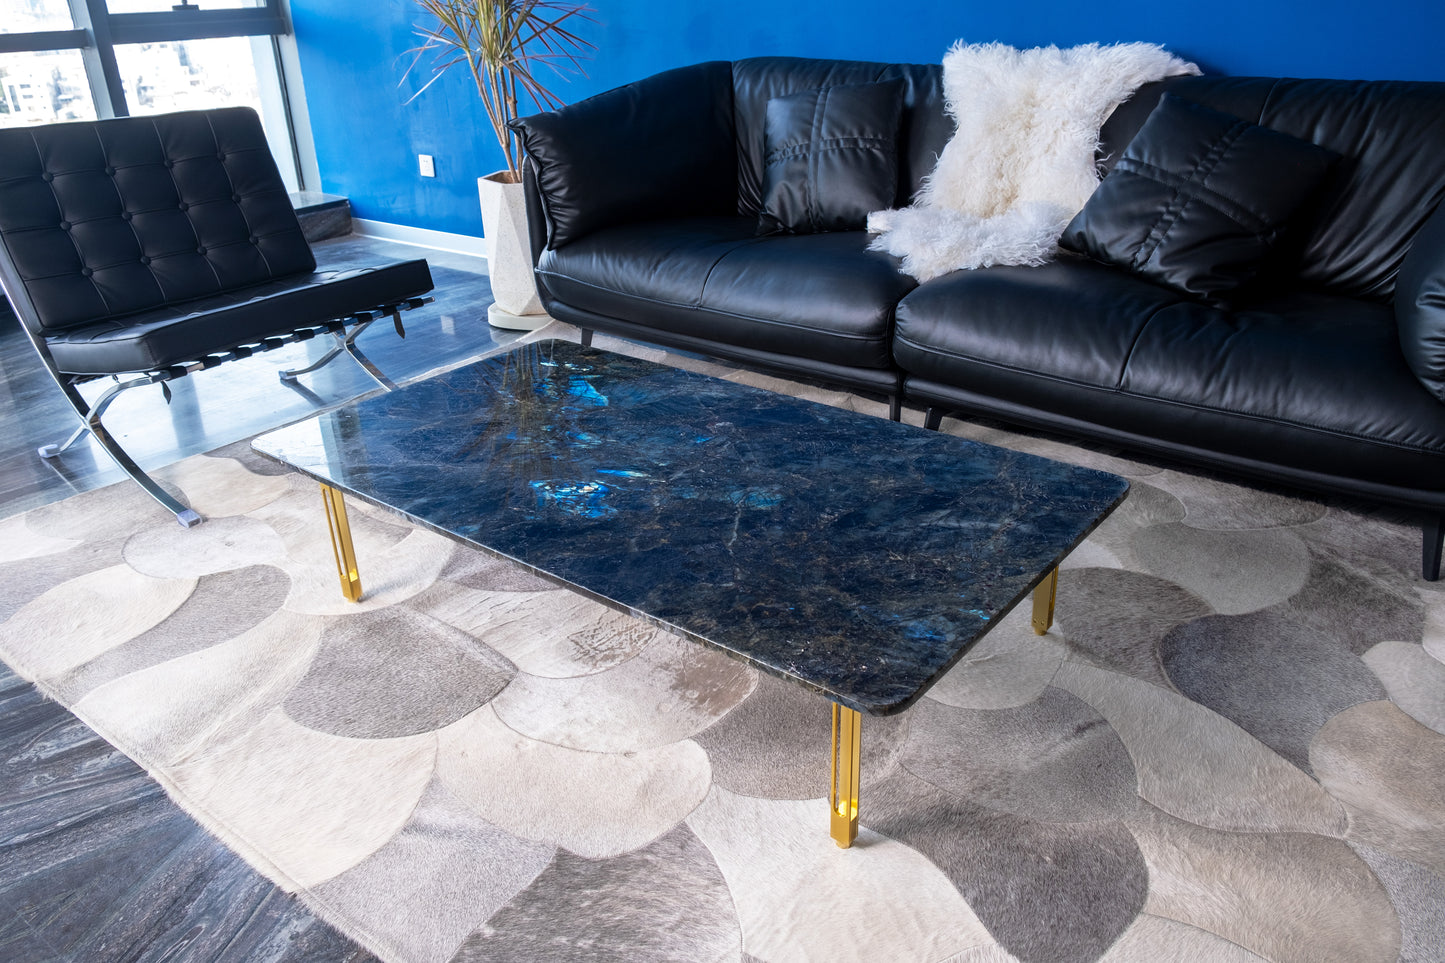 Leisure Natural Marble Stone Coffee Table